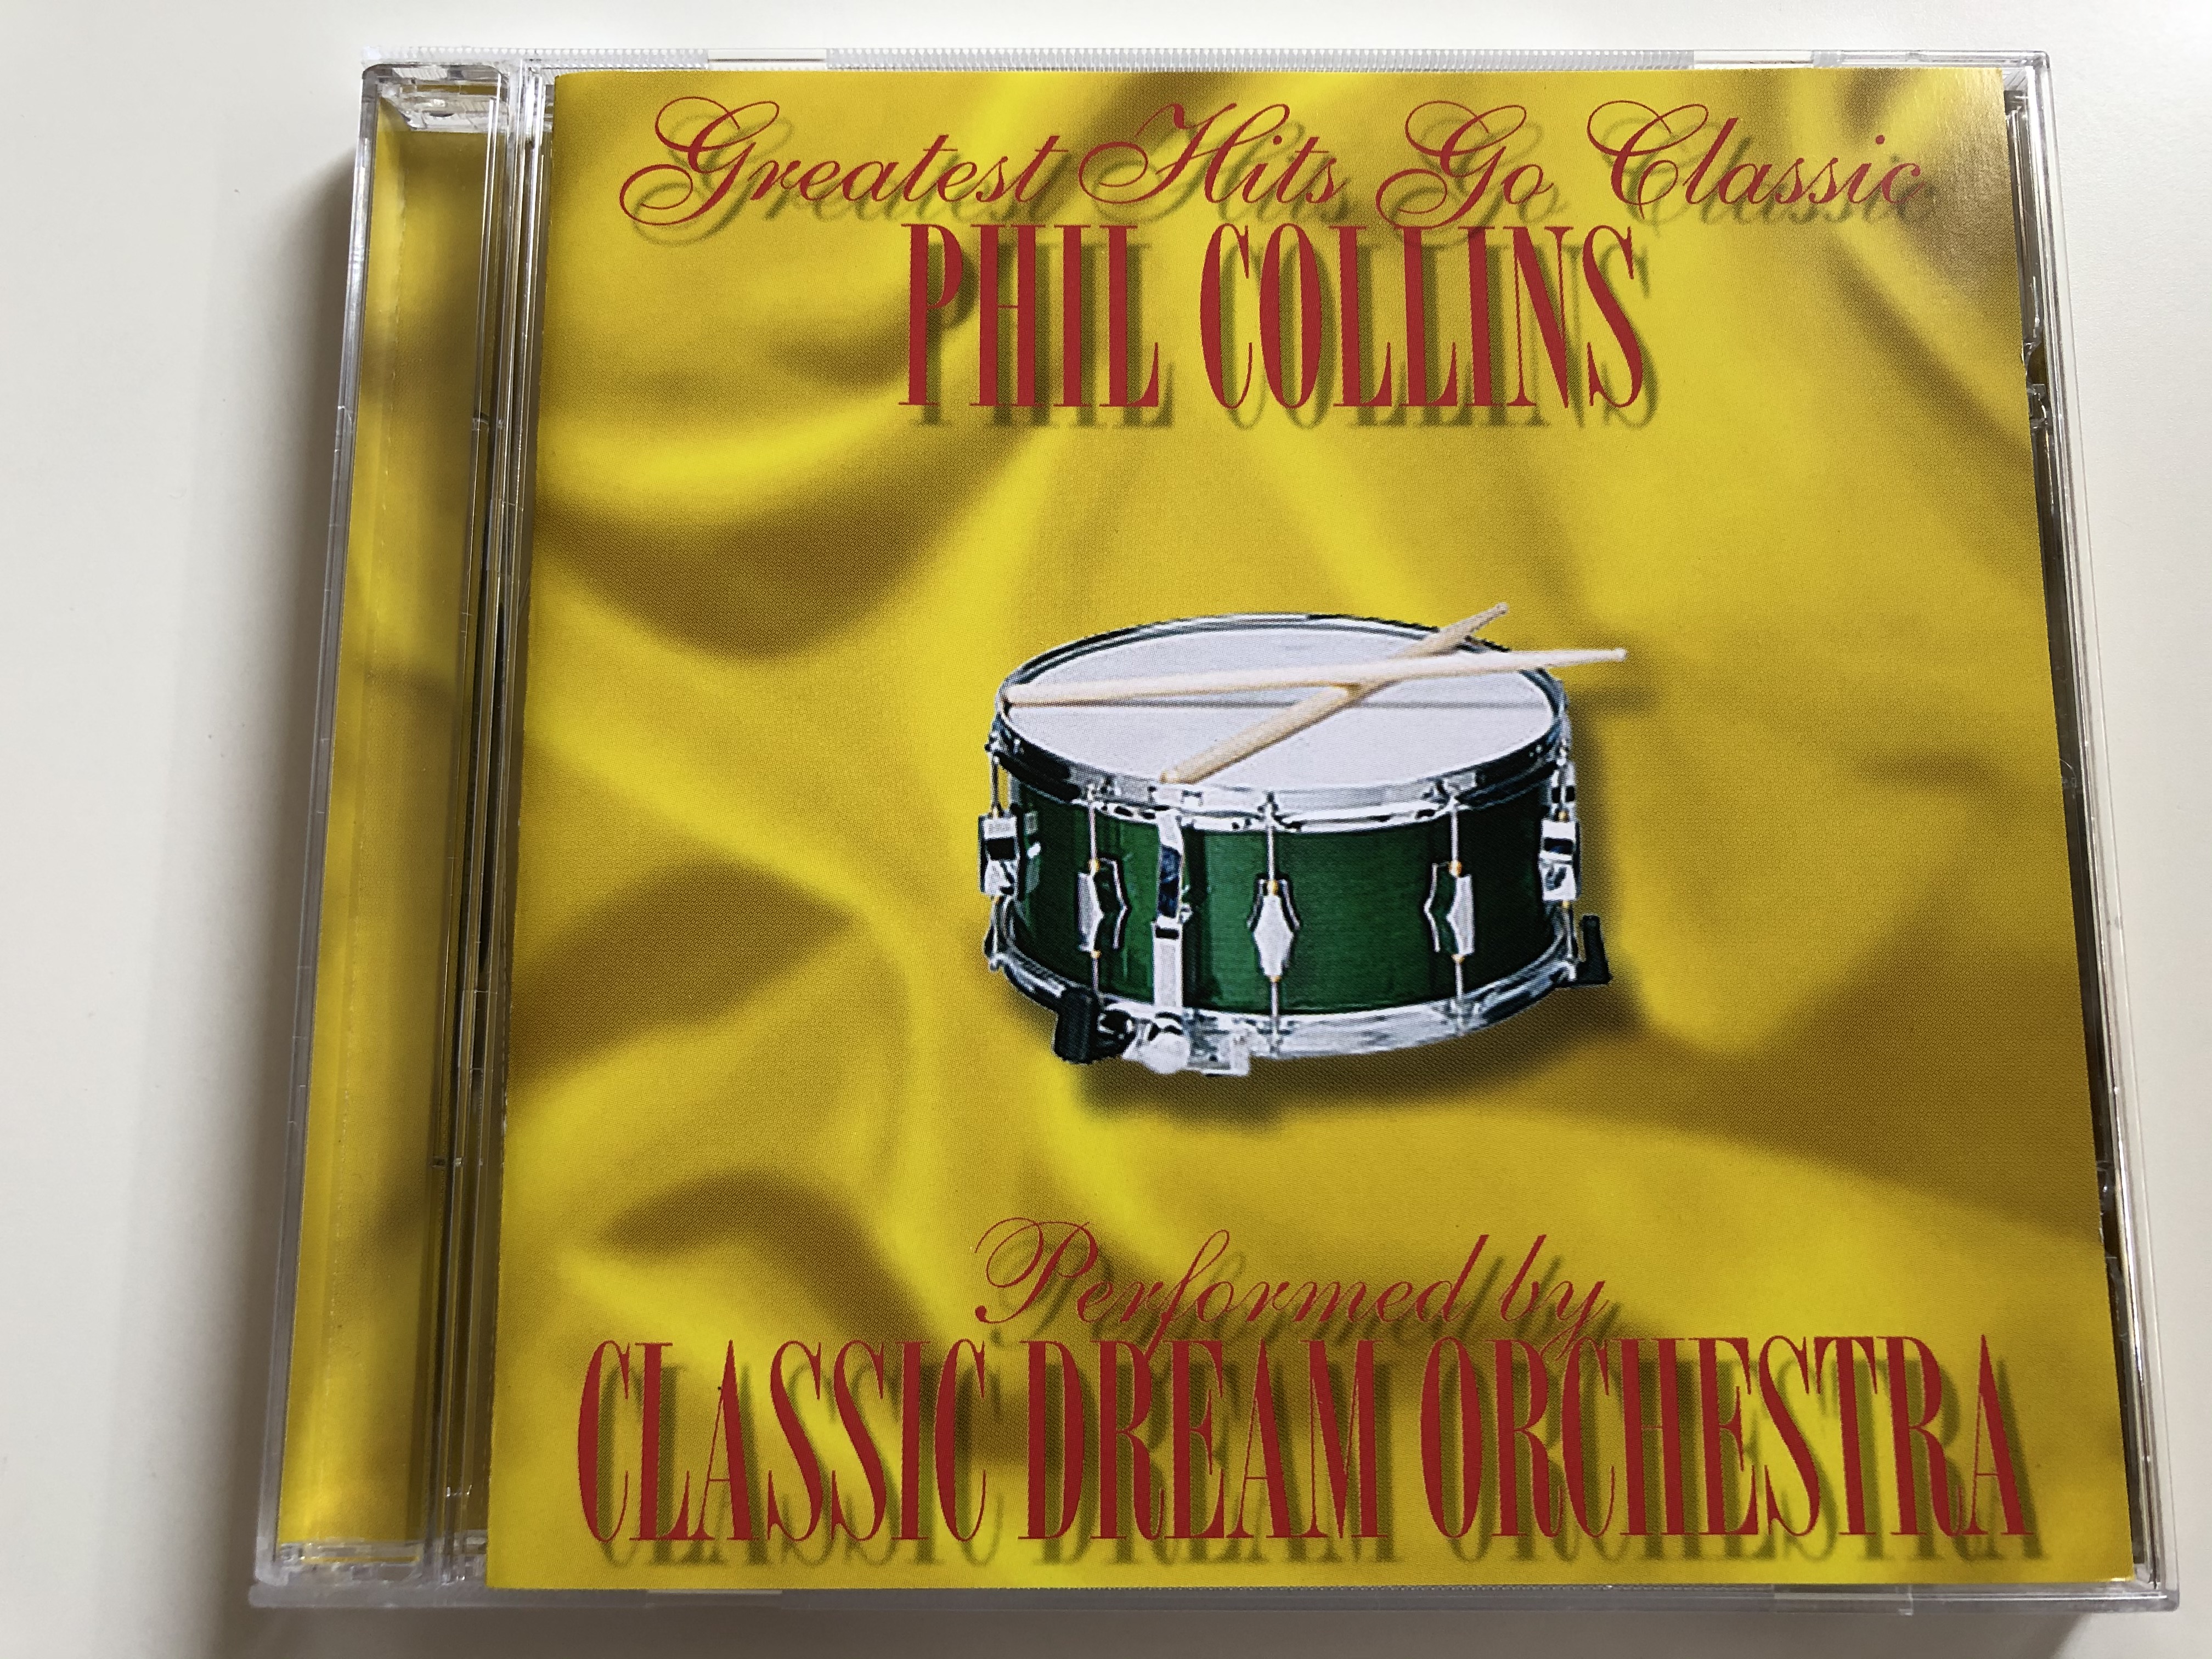 greatest-hits-go-classic-phil-collins-performed-by-classic-dream-orchestra-bmg-audio-cd-2001-stereo-74321-89438-2-1-.jpg